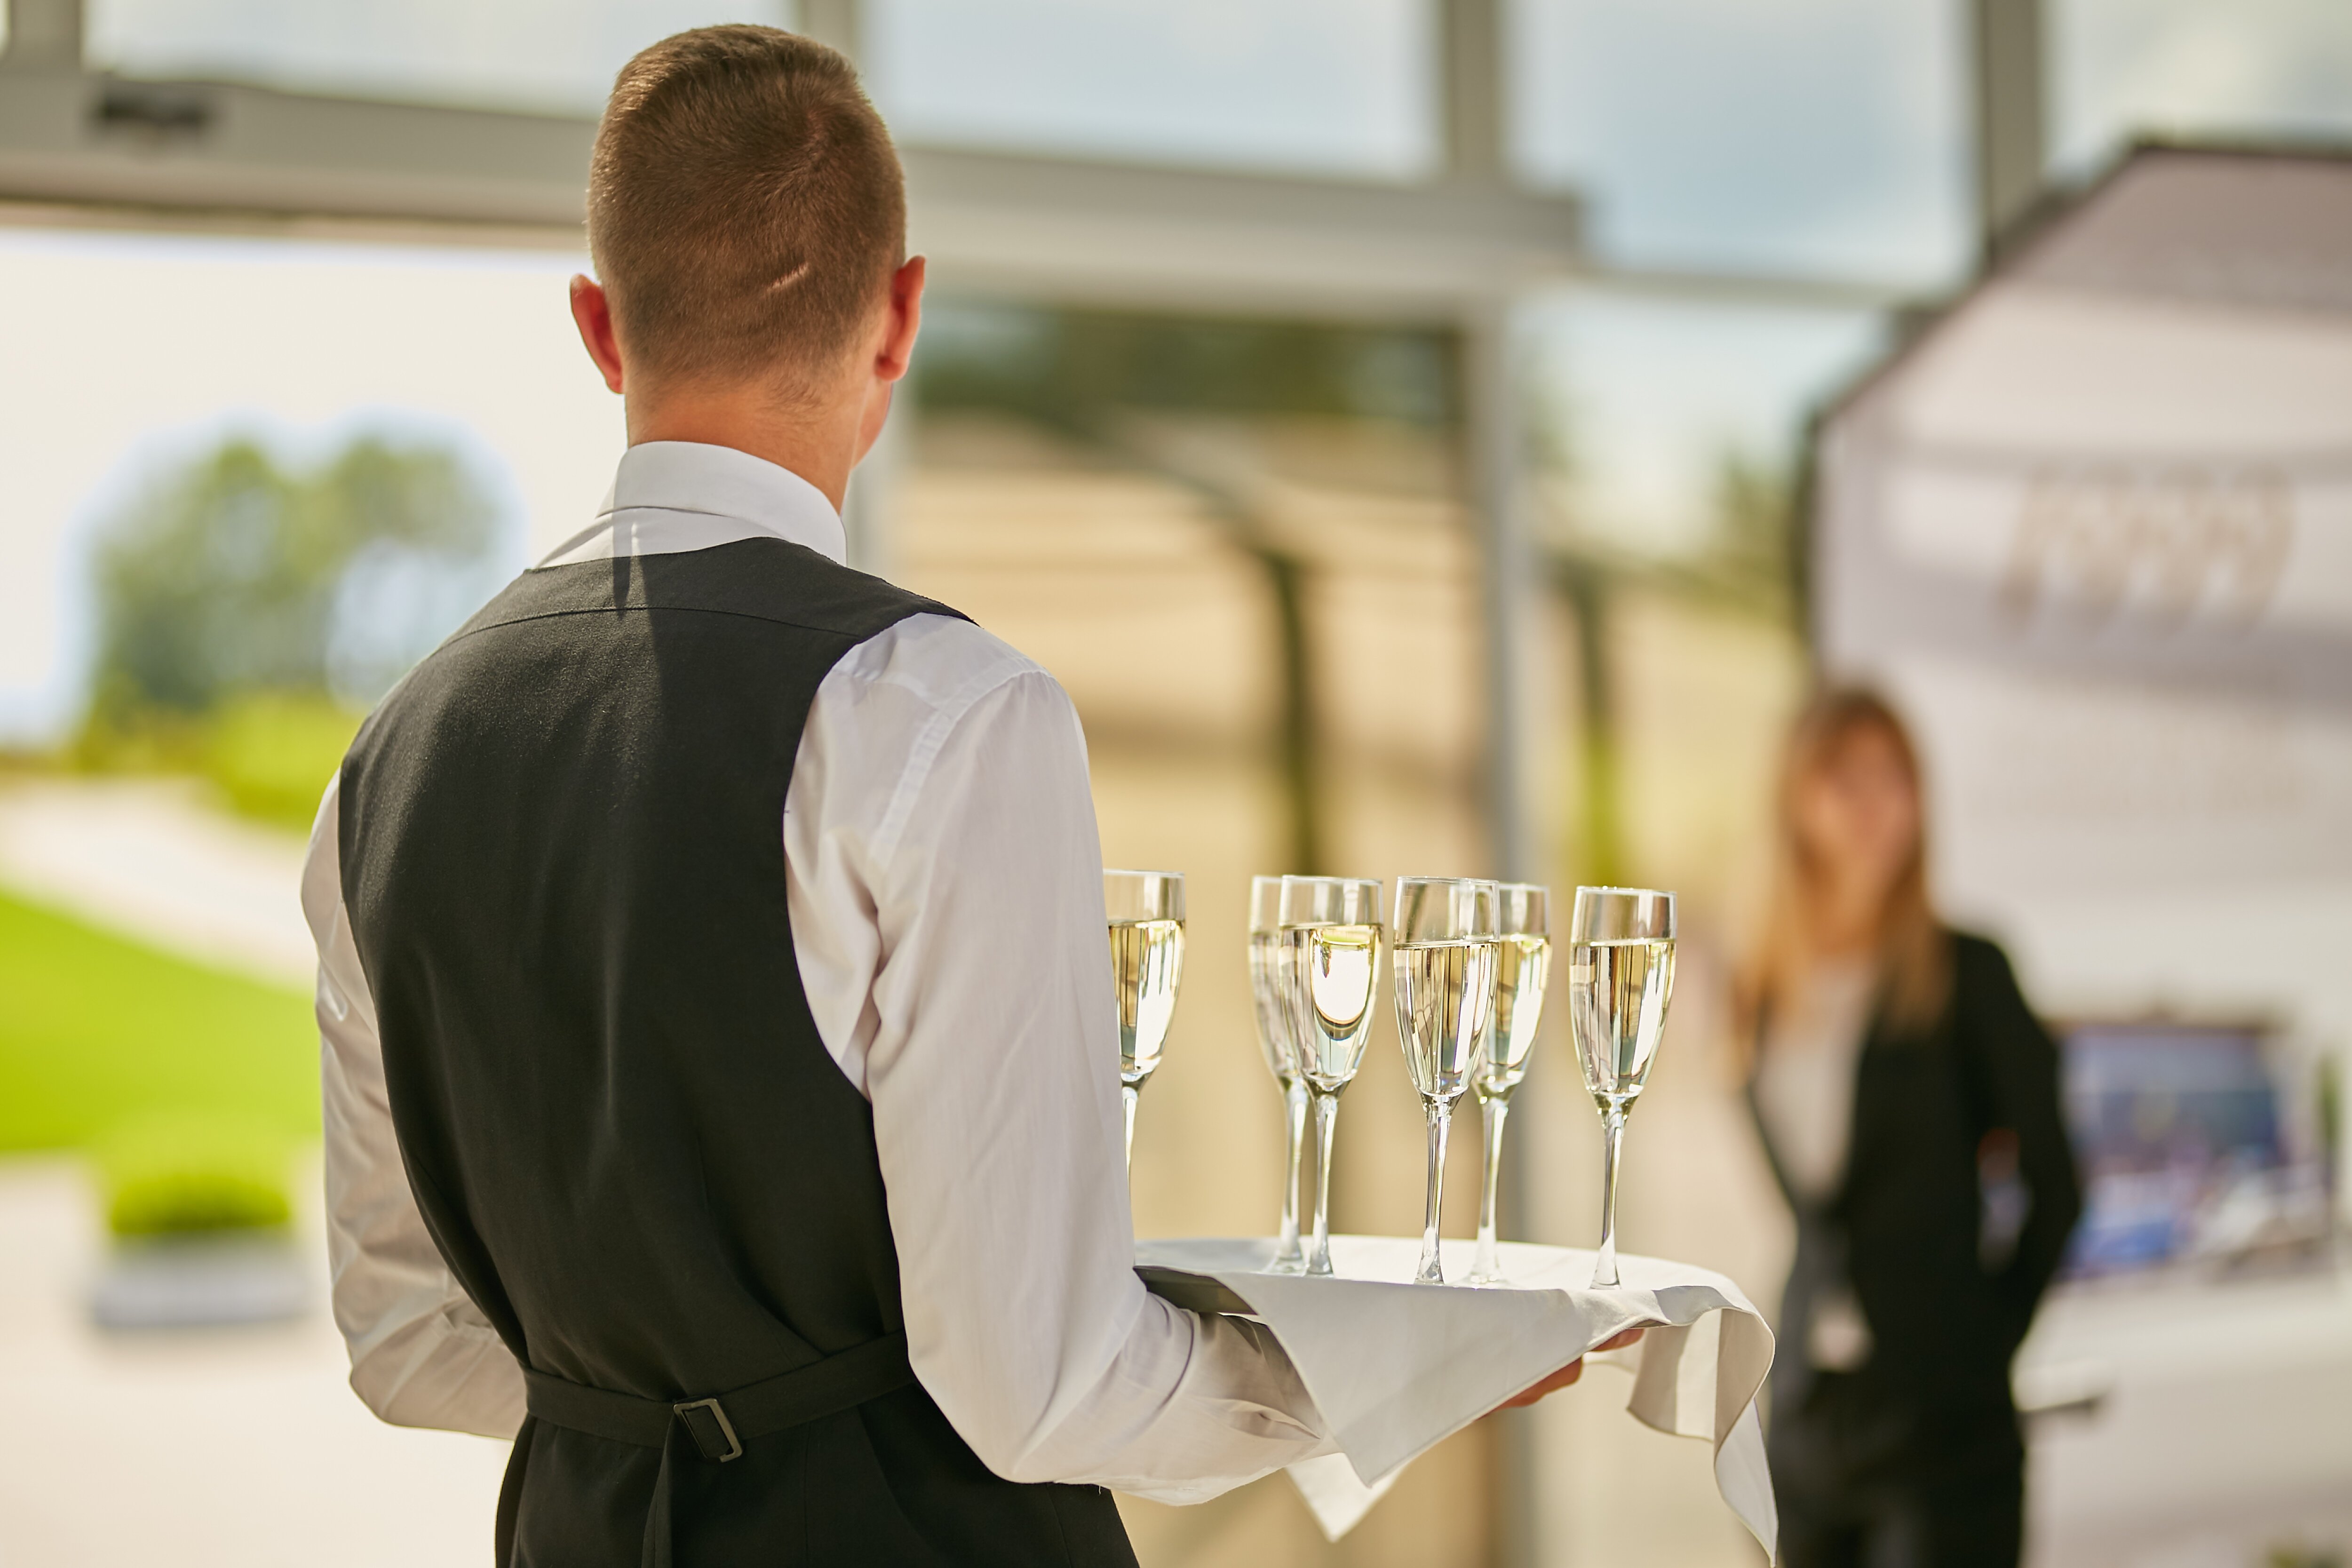 Hospitality 'could create 500,000 new jobs by 2027' with right government support